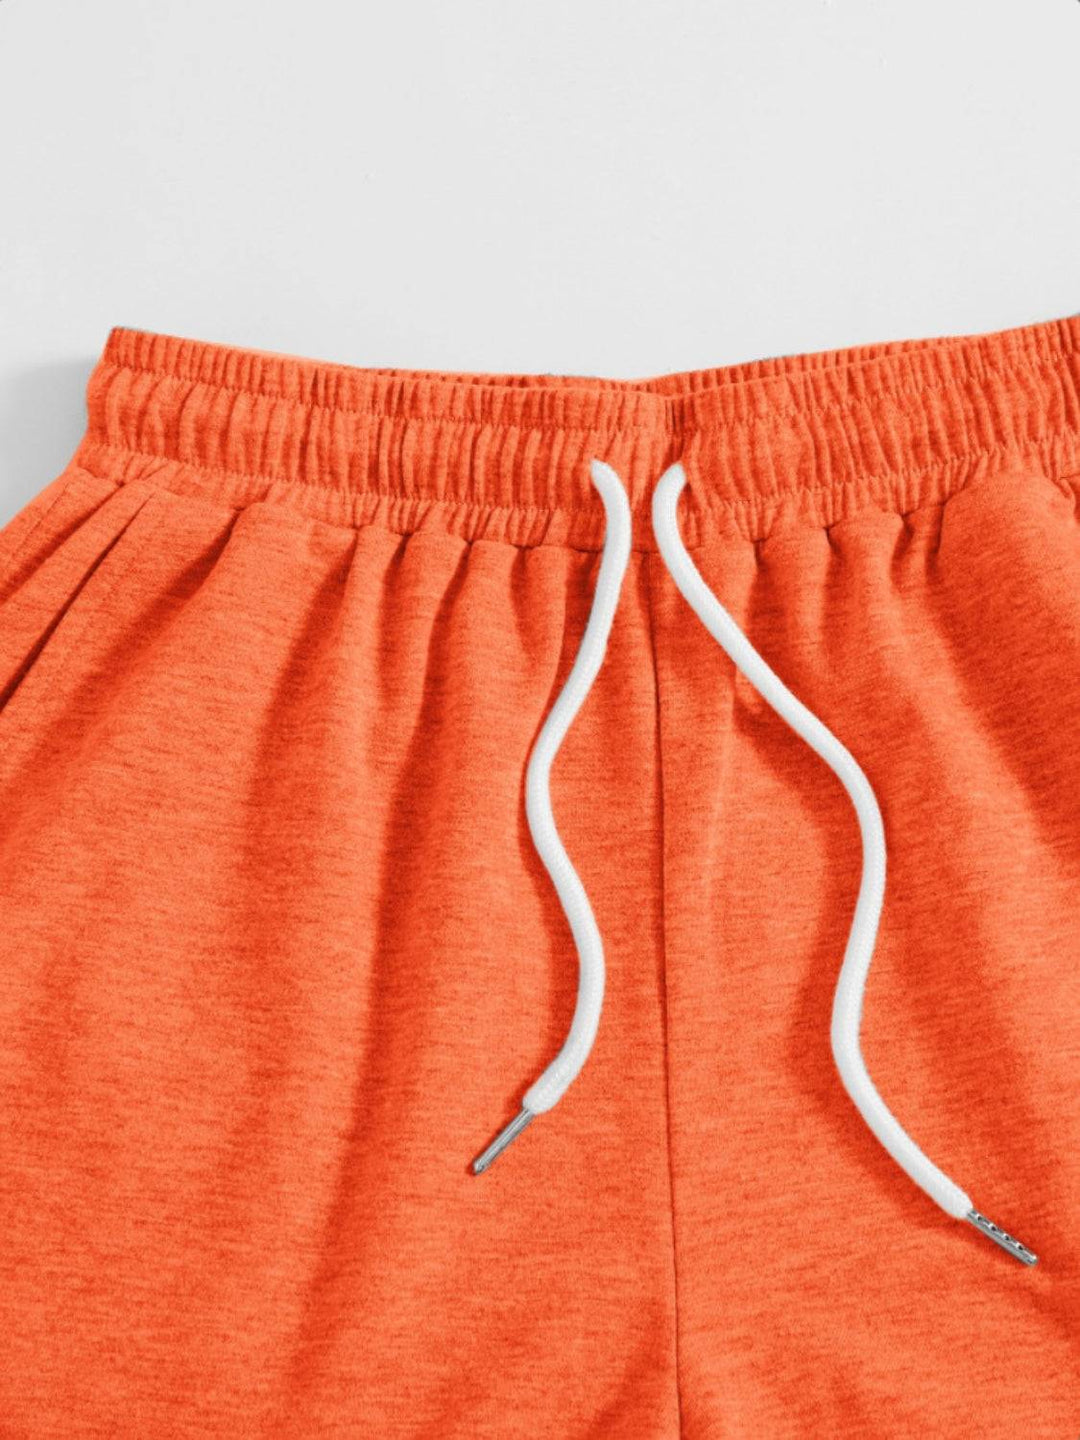 a close up of a pair of orange shorts